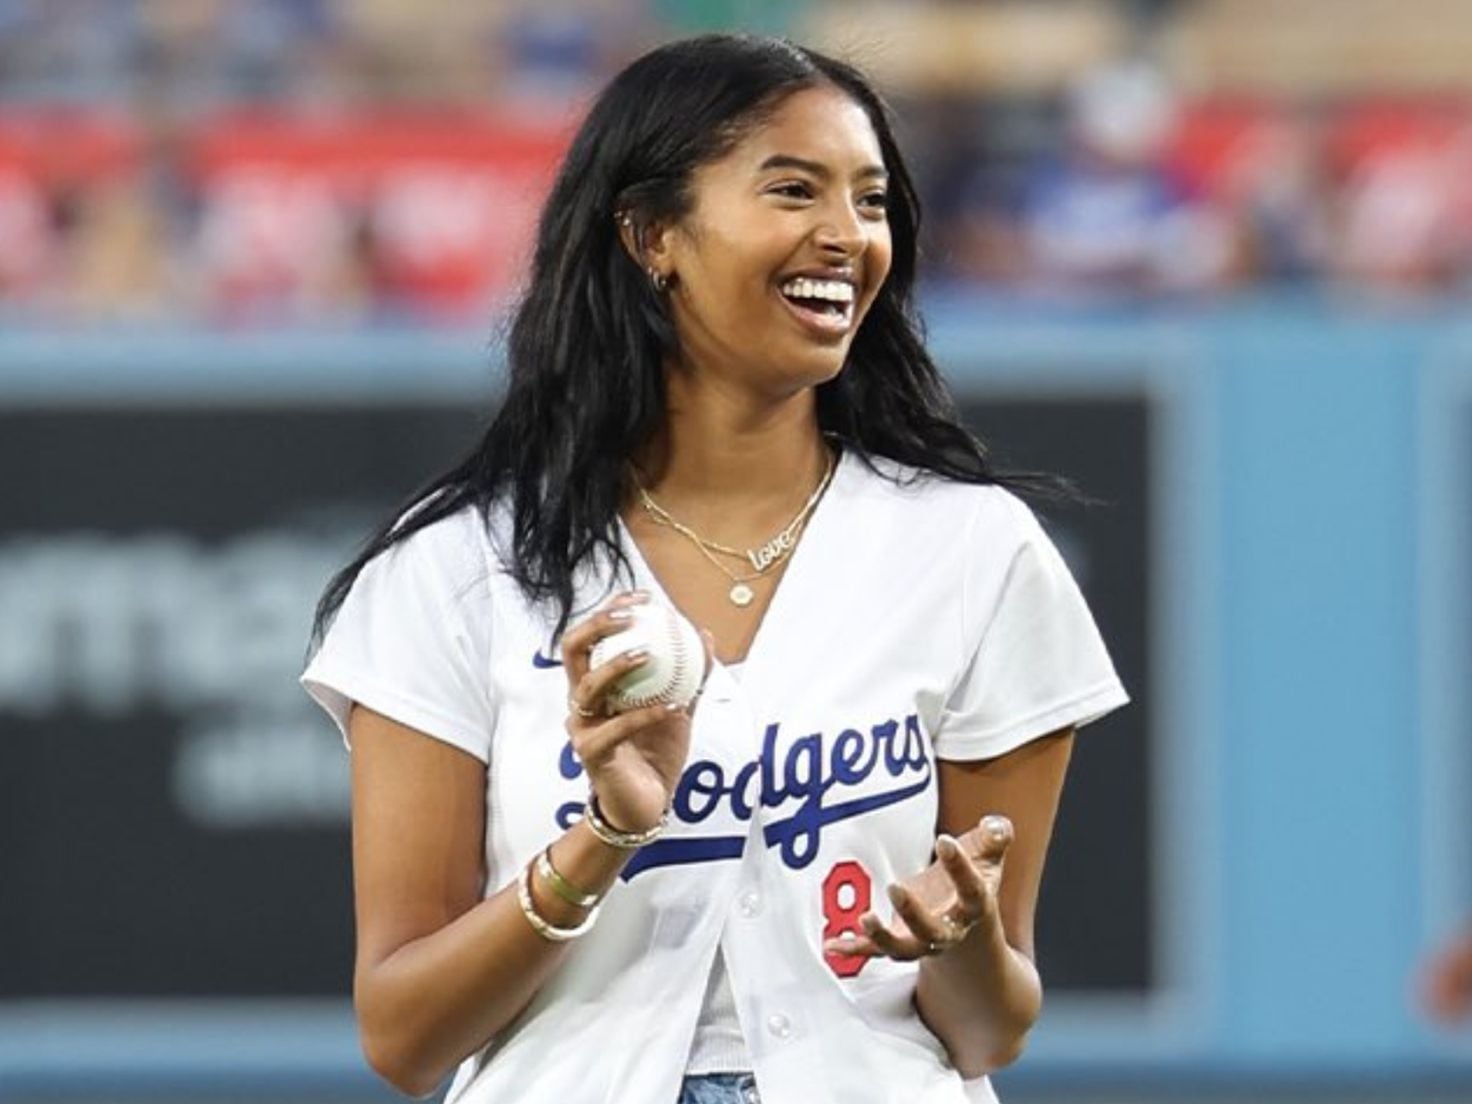 Kobe Bryant's daughter Natalia throws first pitch at Dodgers game